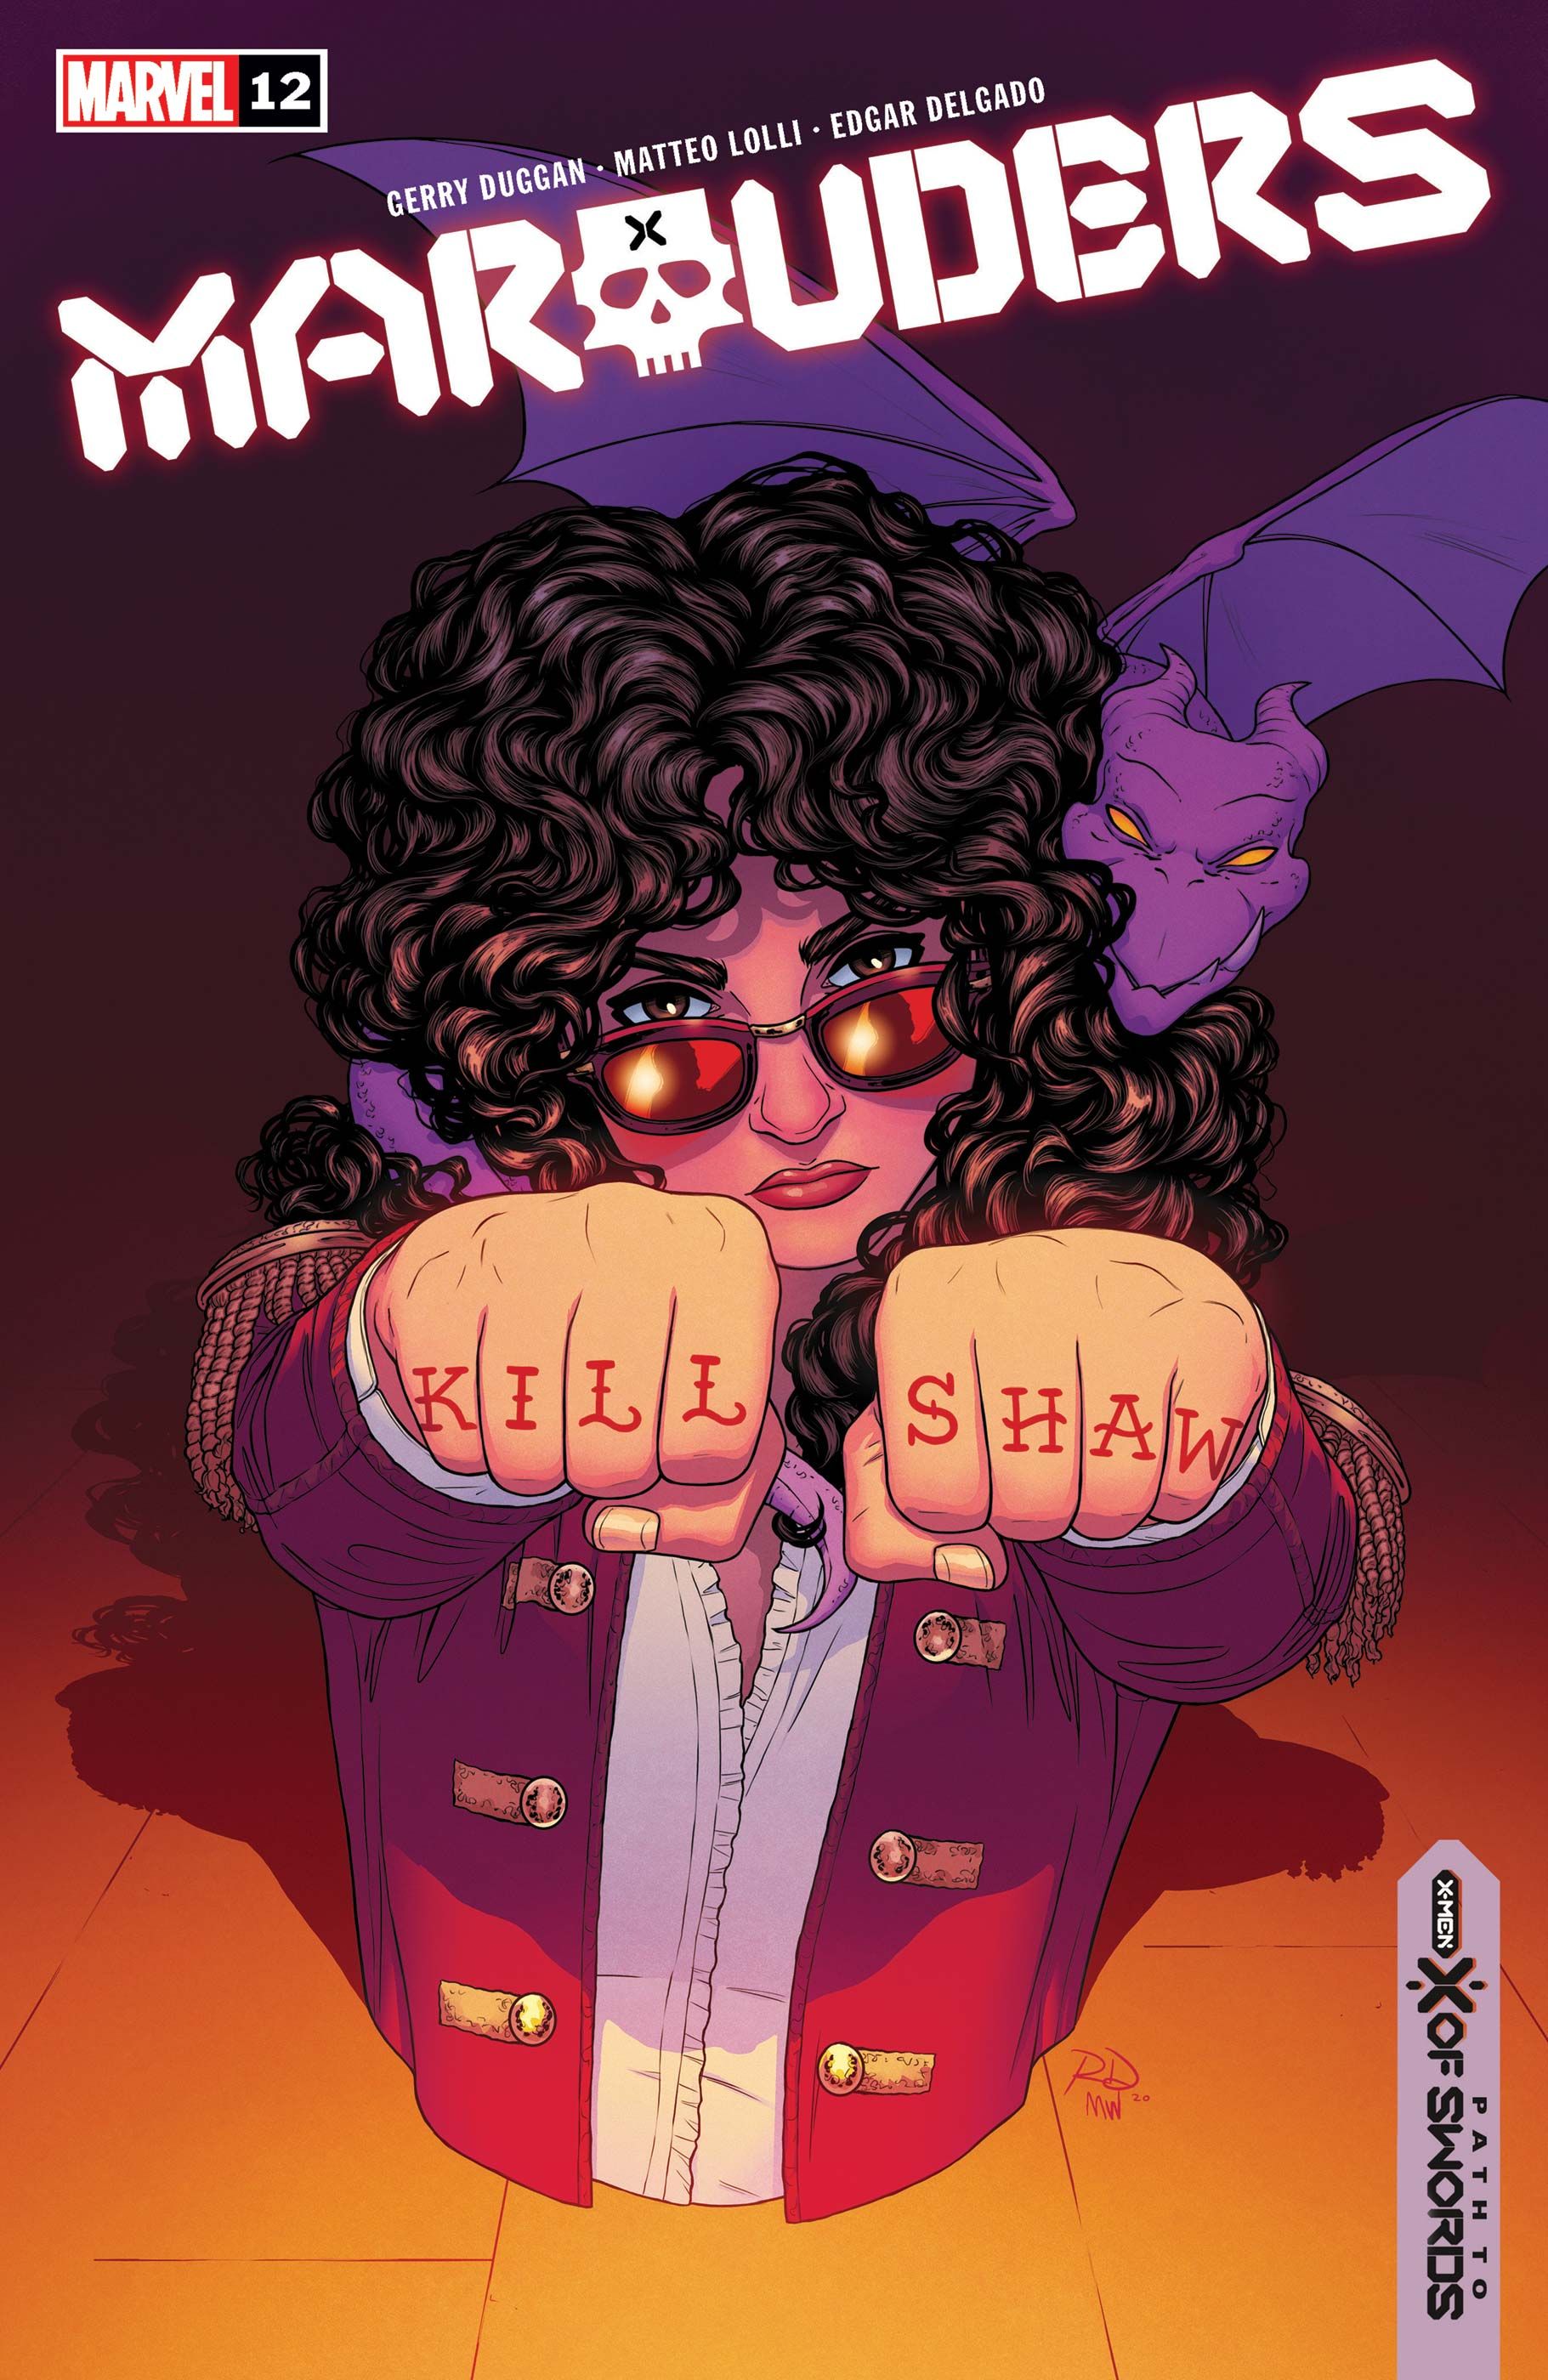 Russell Dauterman and Matthew Wilson's cover to Marauders #12, featuring curly-haired Kate Prye.